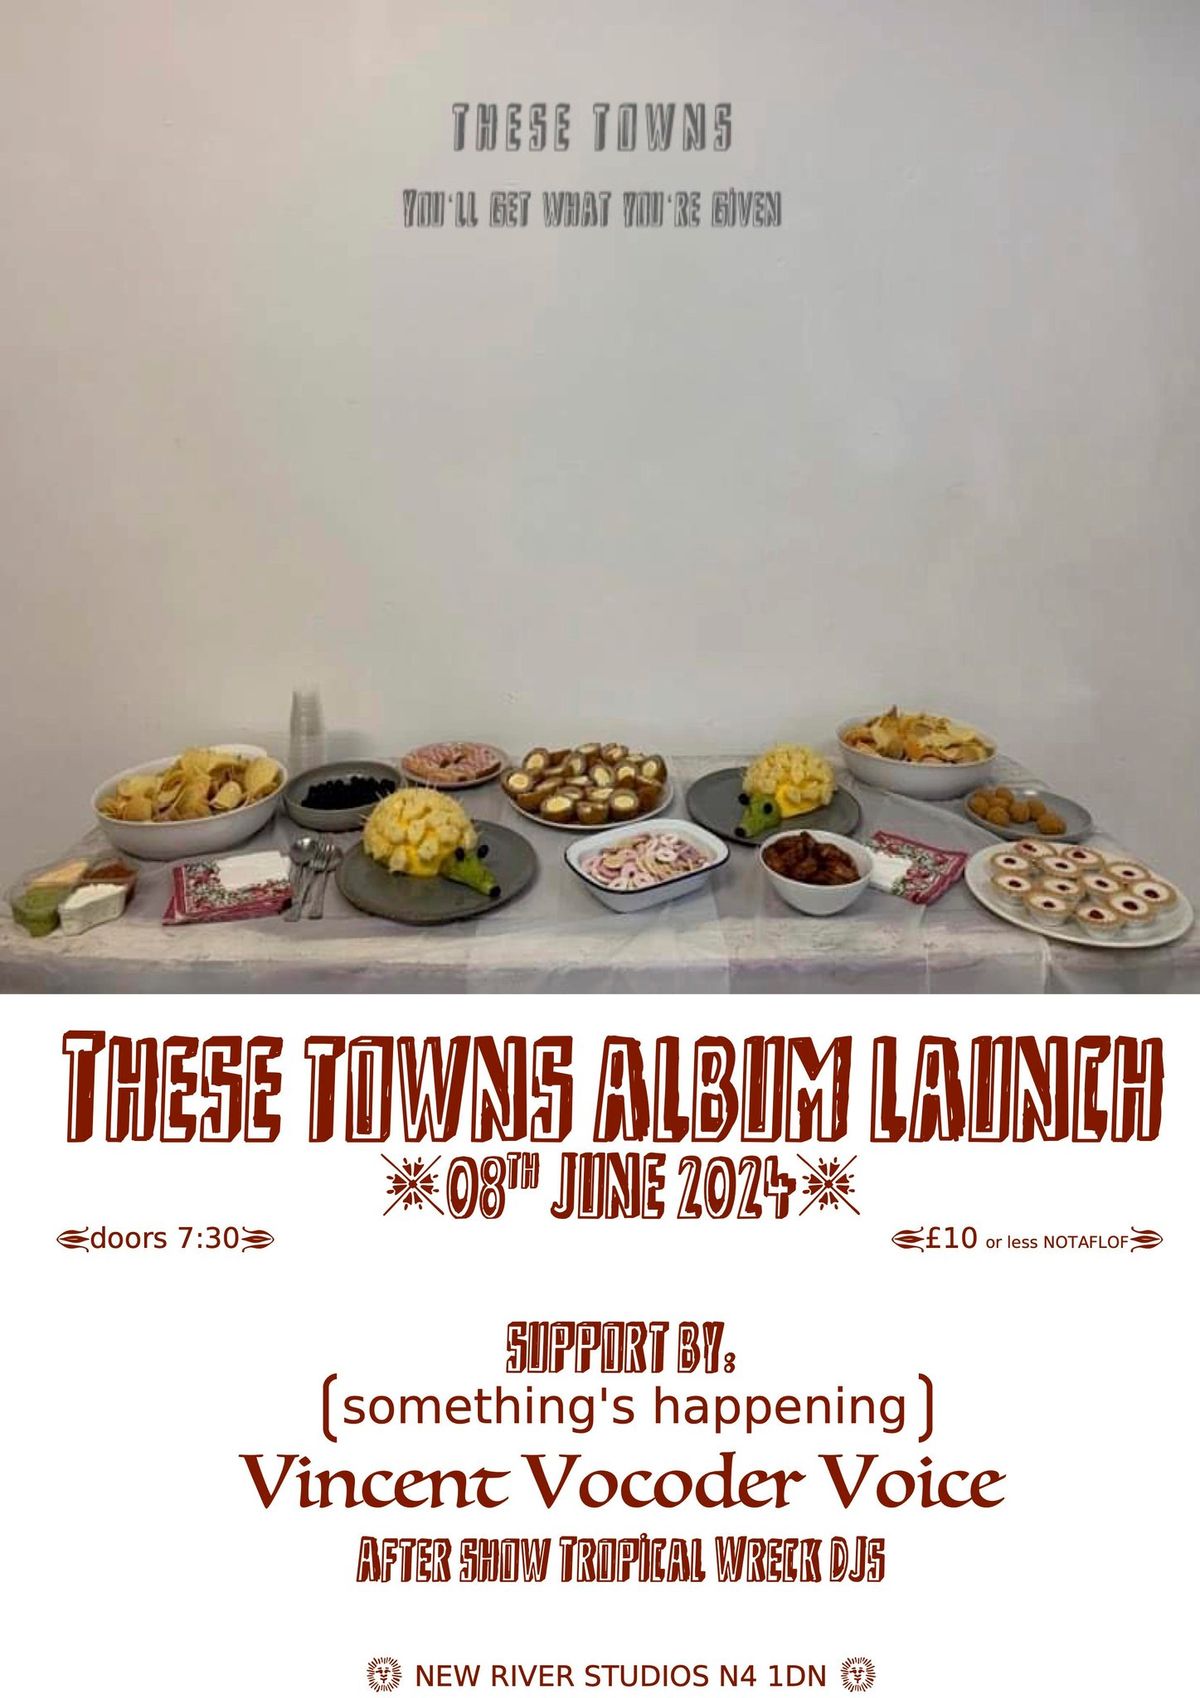 These Towns (album launch), Vincent Vocoder Voice, [something's happening]